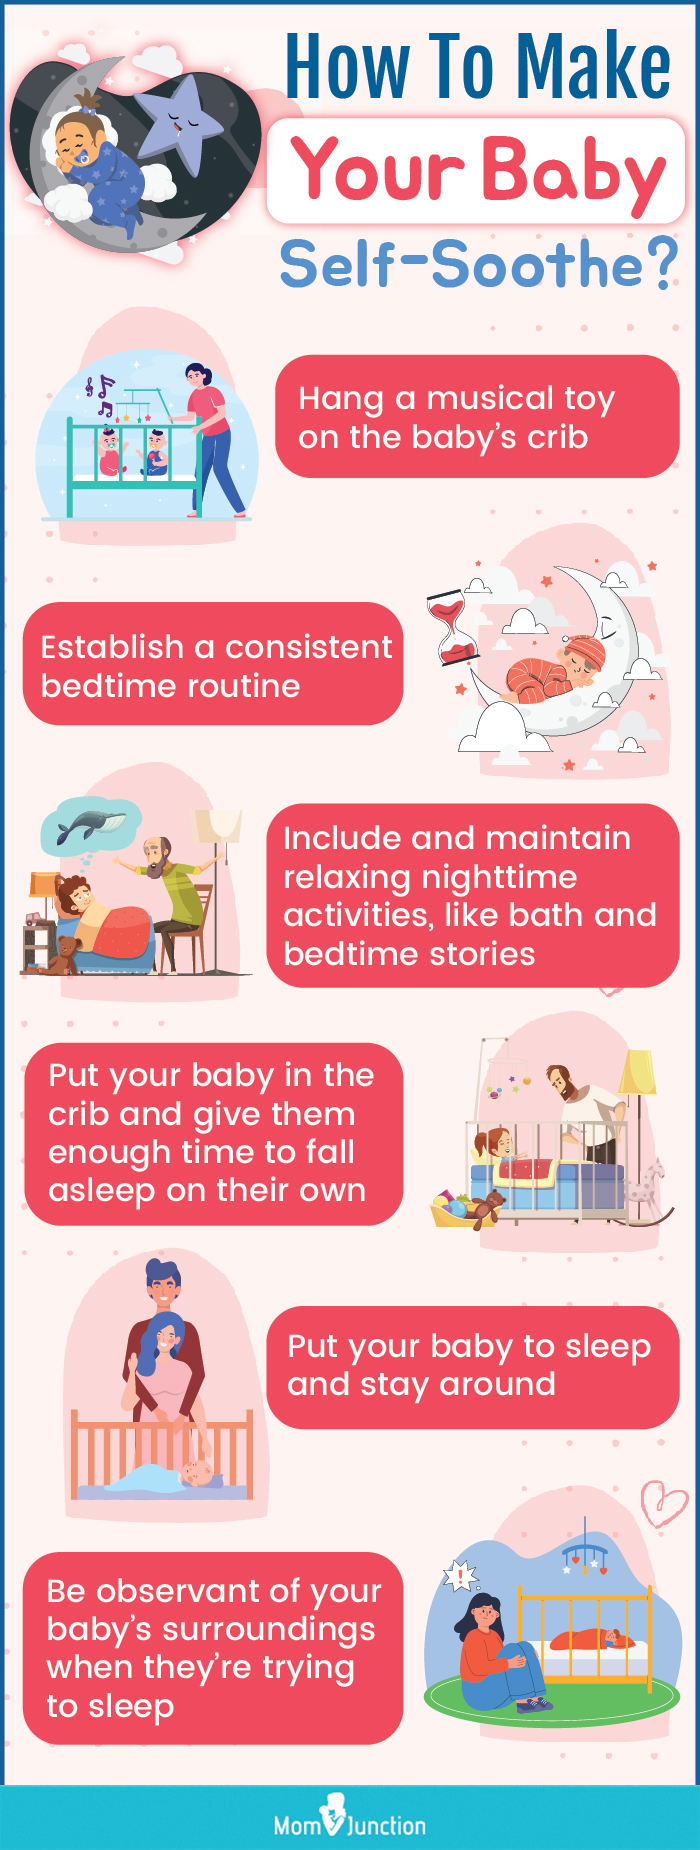 how to make your baby self soothe (infographic)